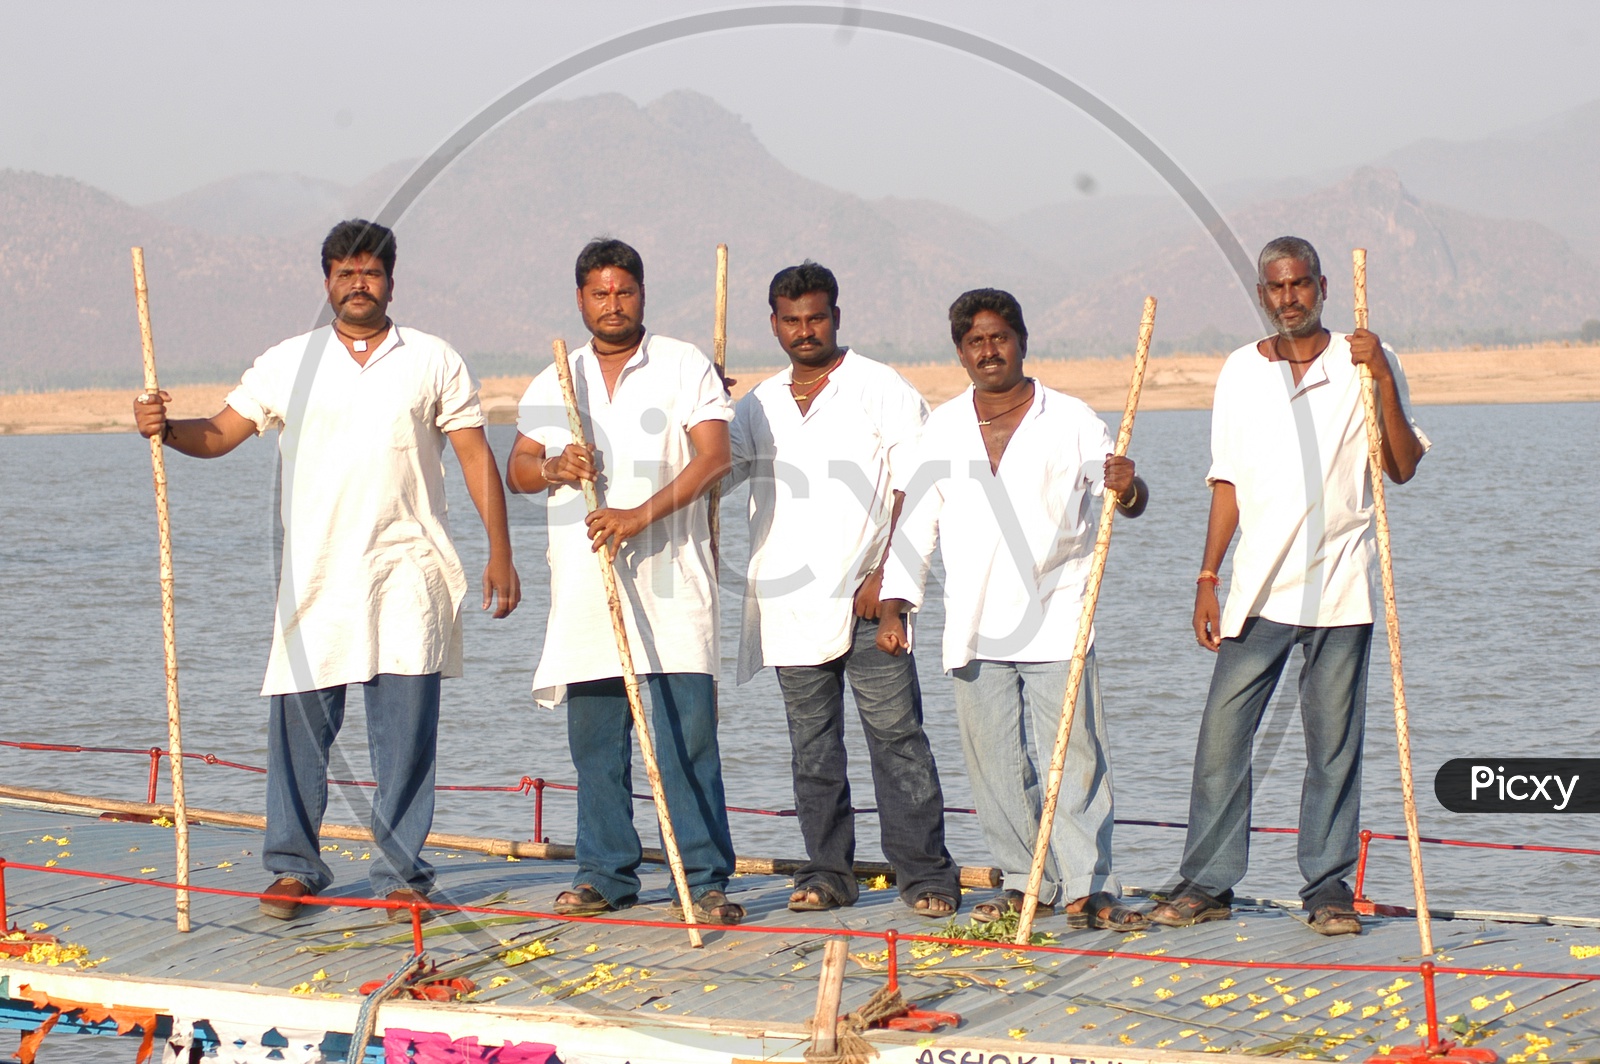 A Group Of Goons With Wooden Sticks In Hand in Movie Working Stills